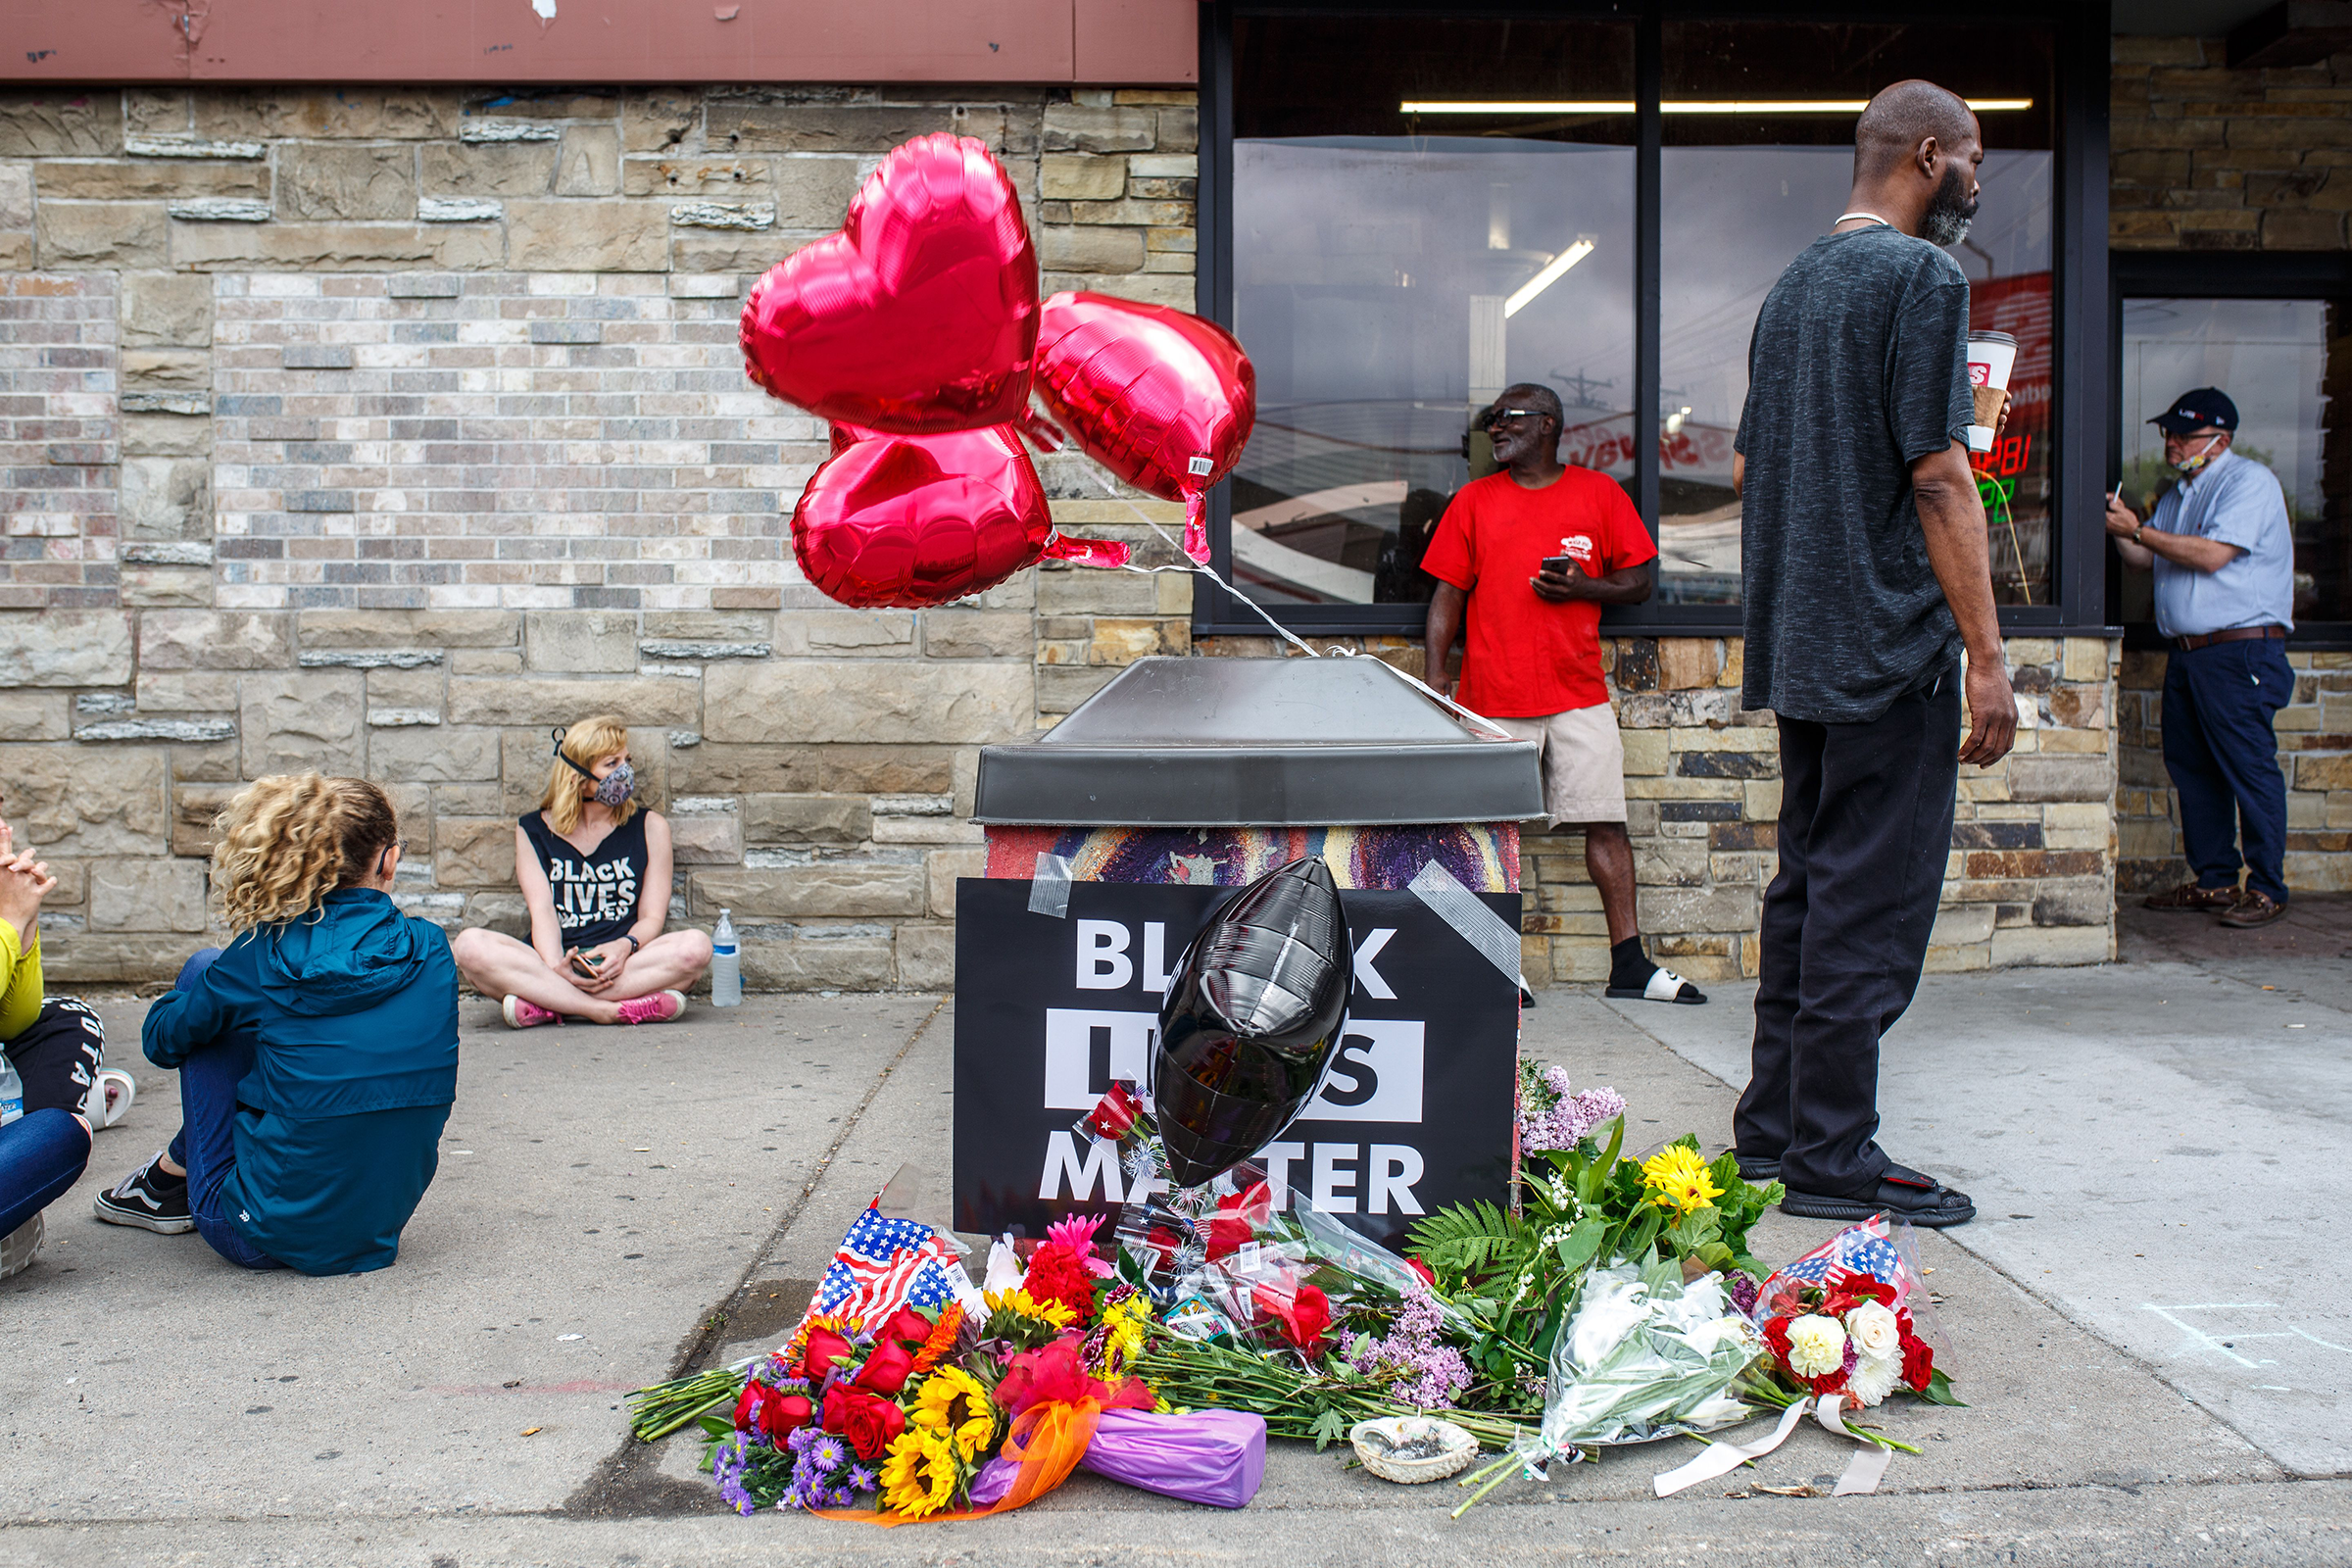 A memorial left for George Floyd, at the scene where an officer pinned him down a day earlier, in Minneapolis on May 26, 2020.